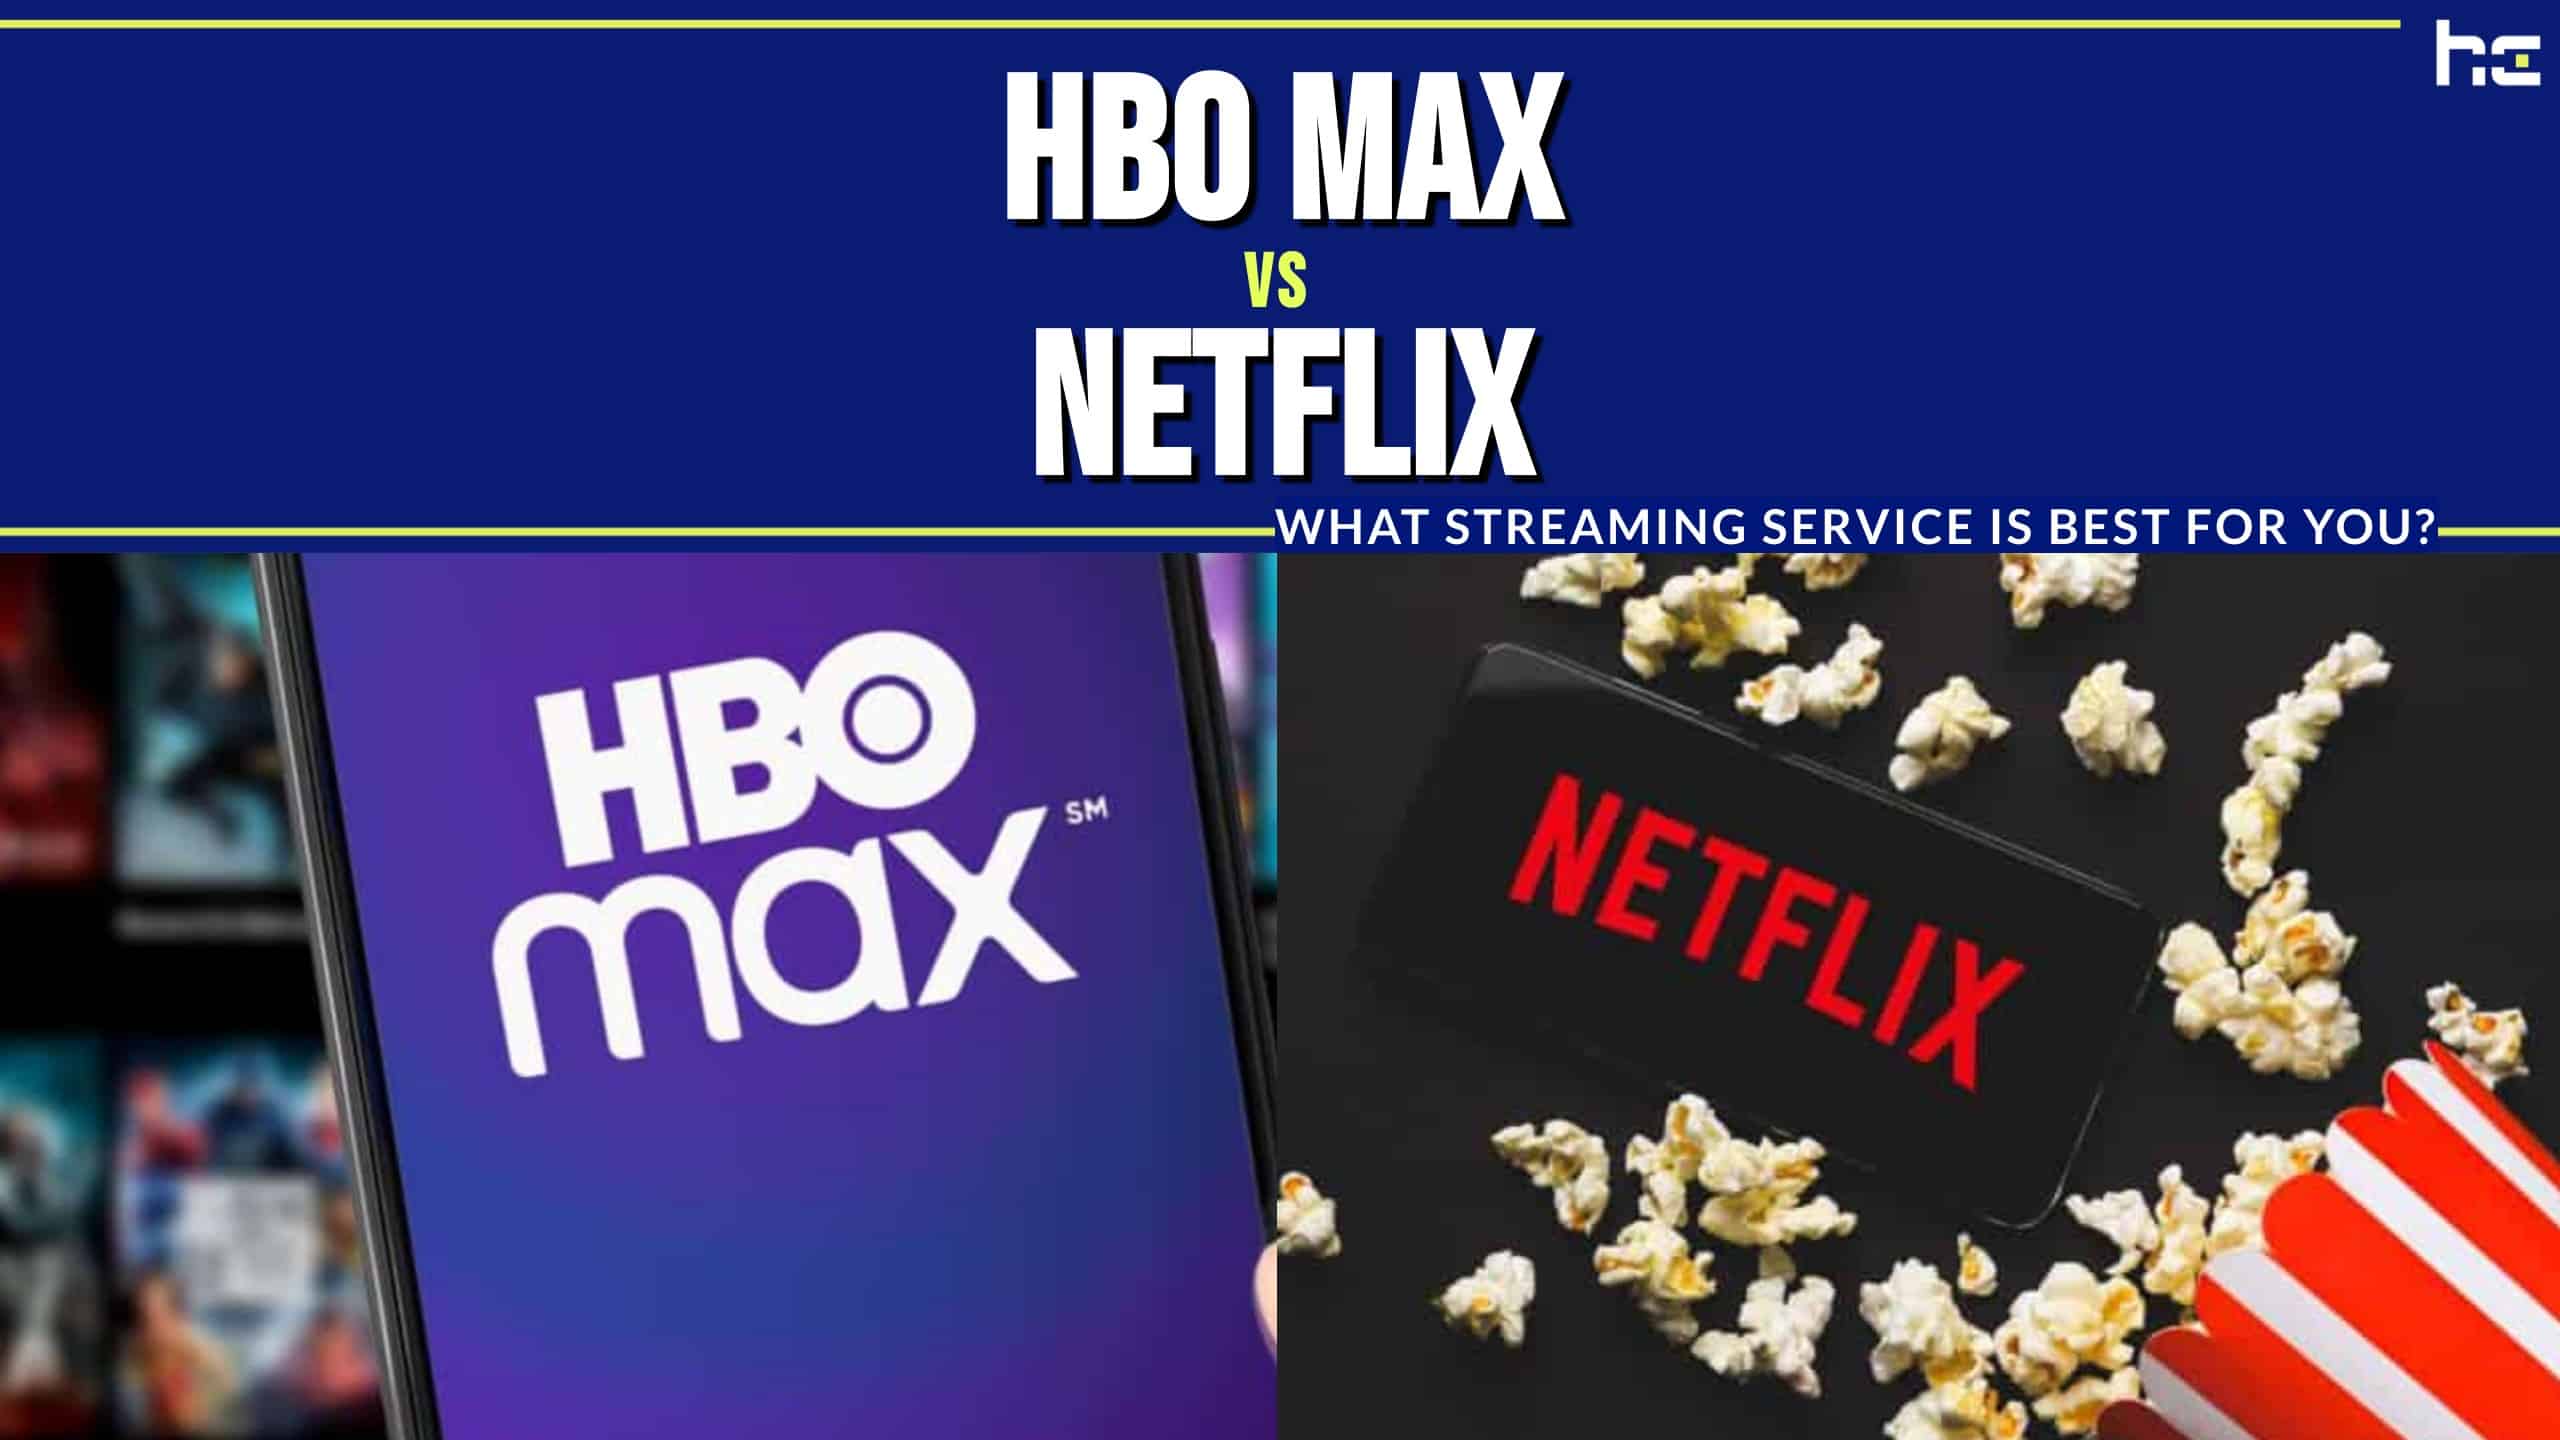 HBO Max vs Netflix featured image